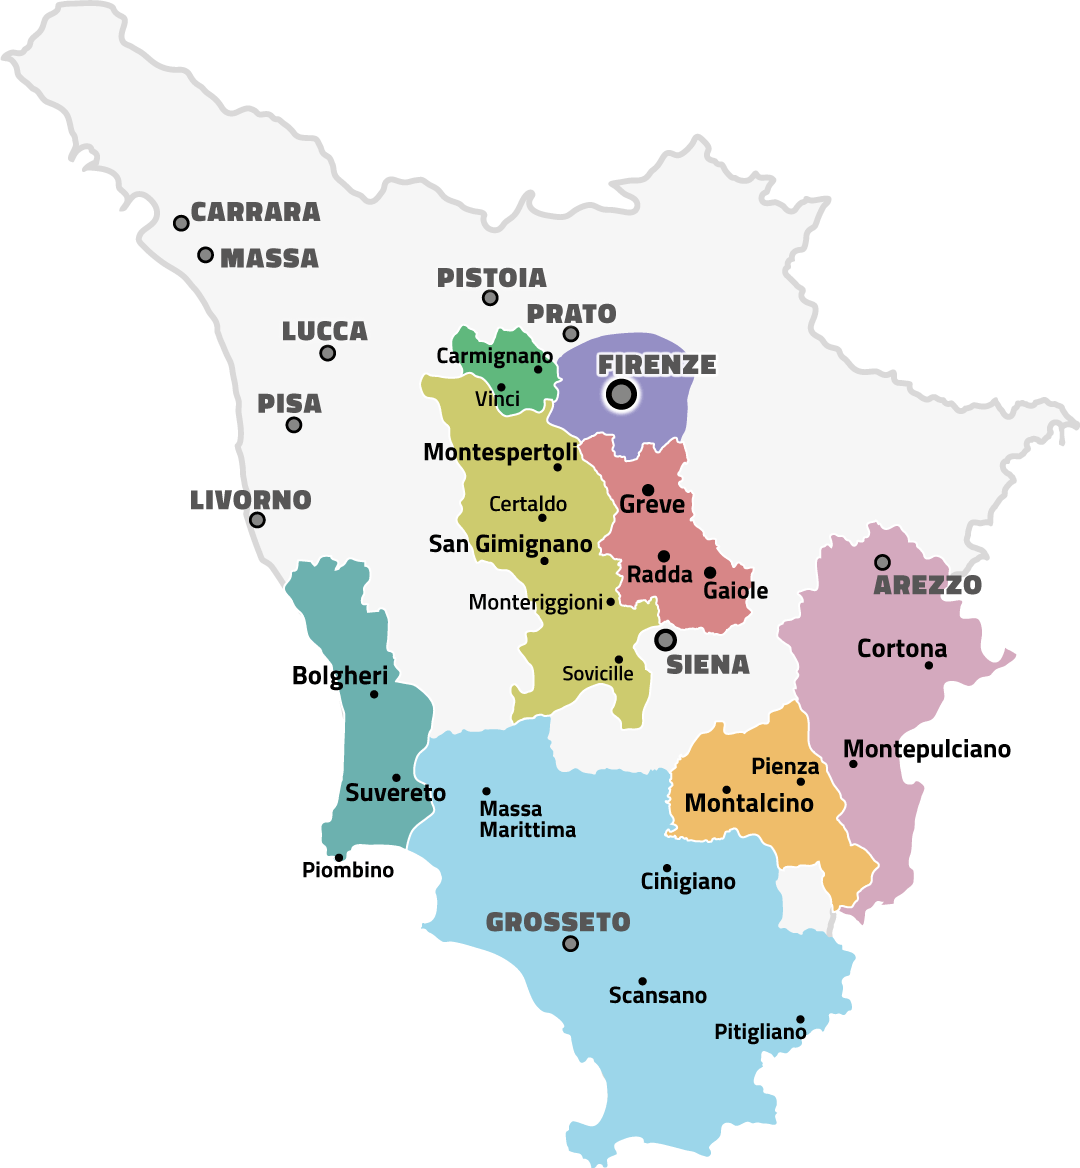 map tuscany wineries